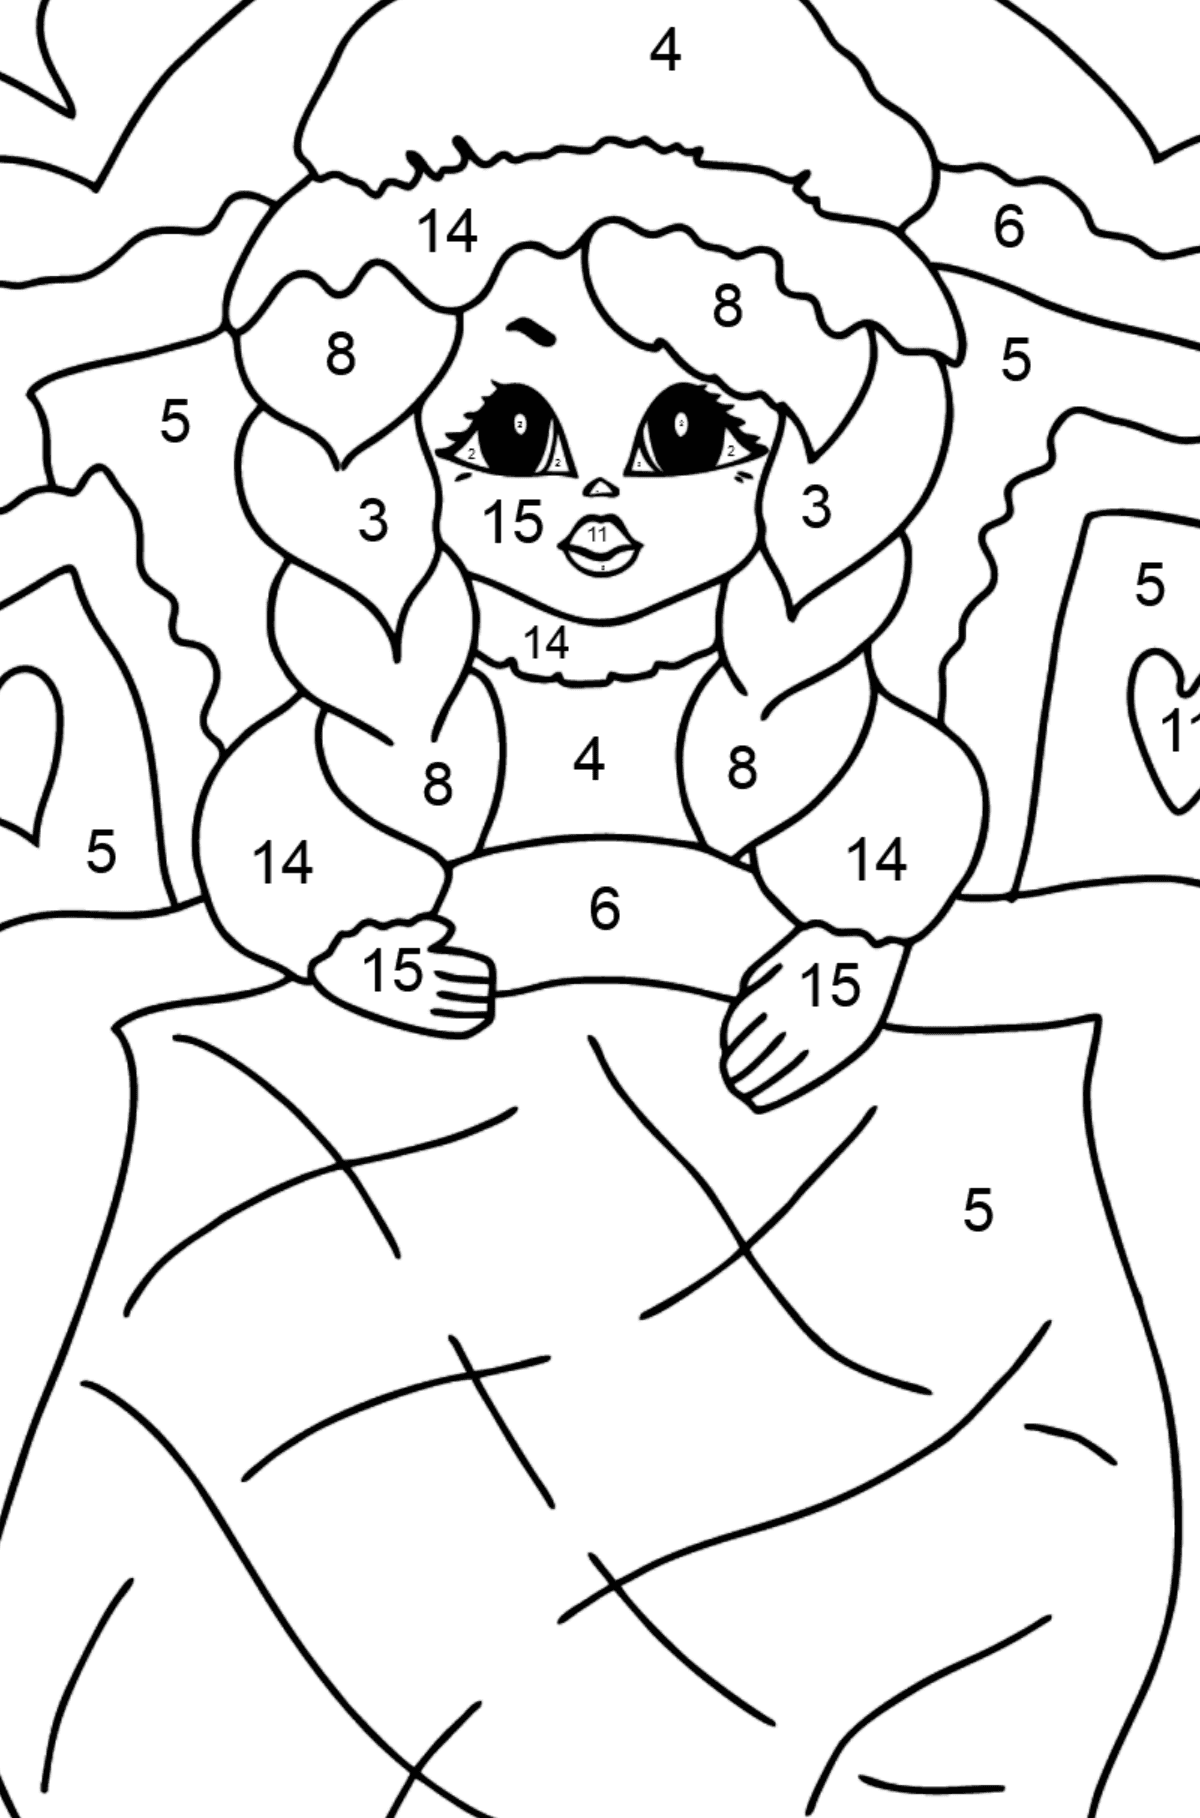 Coloring Page - A Princess in a Bed - for Girls - Coloring by Numbers for Kids